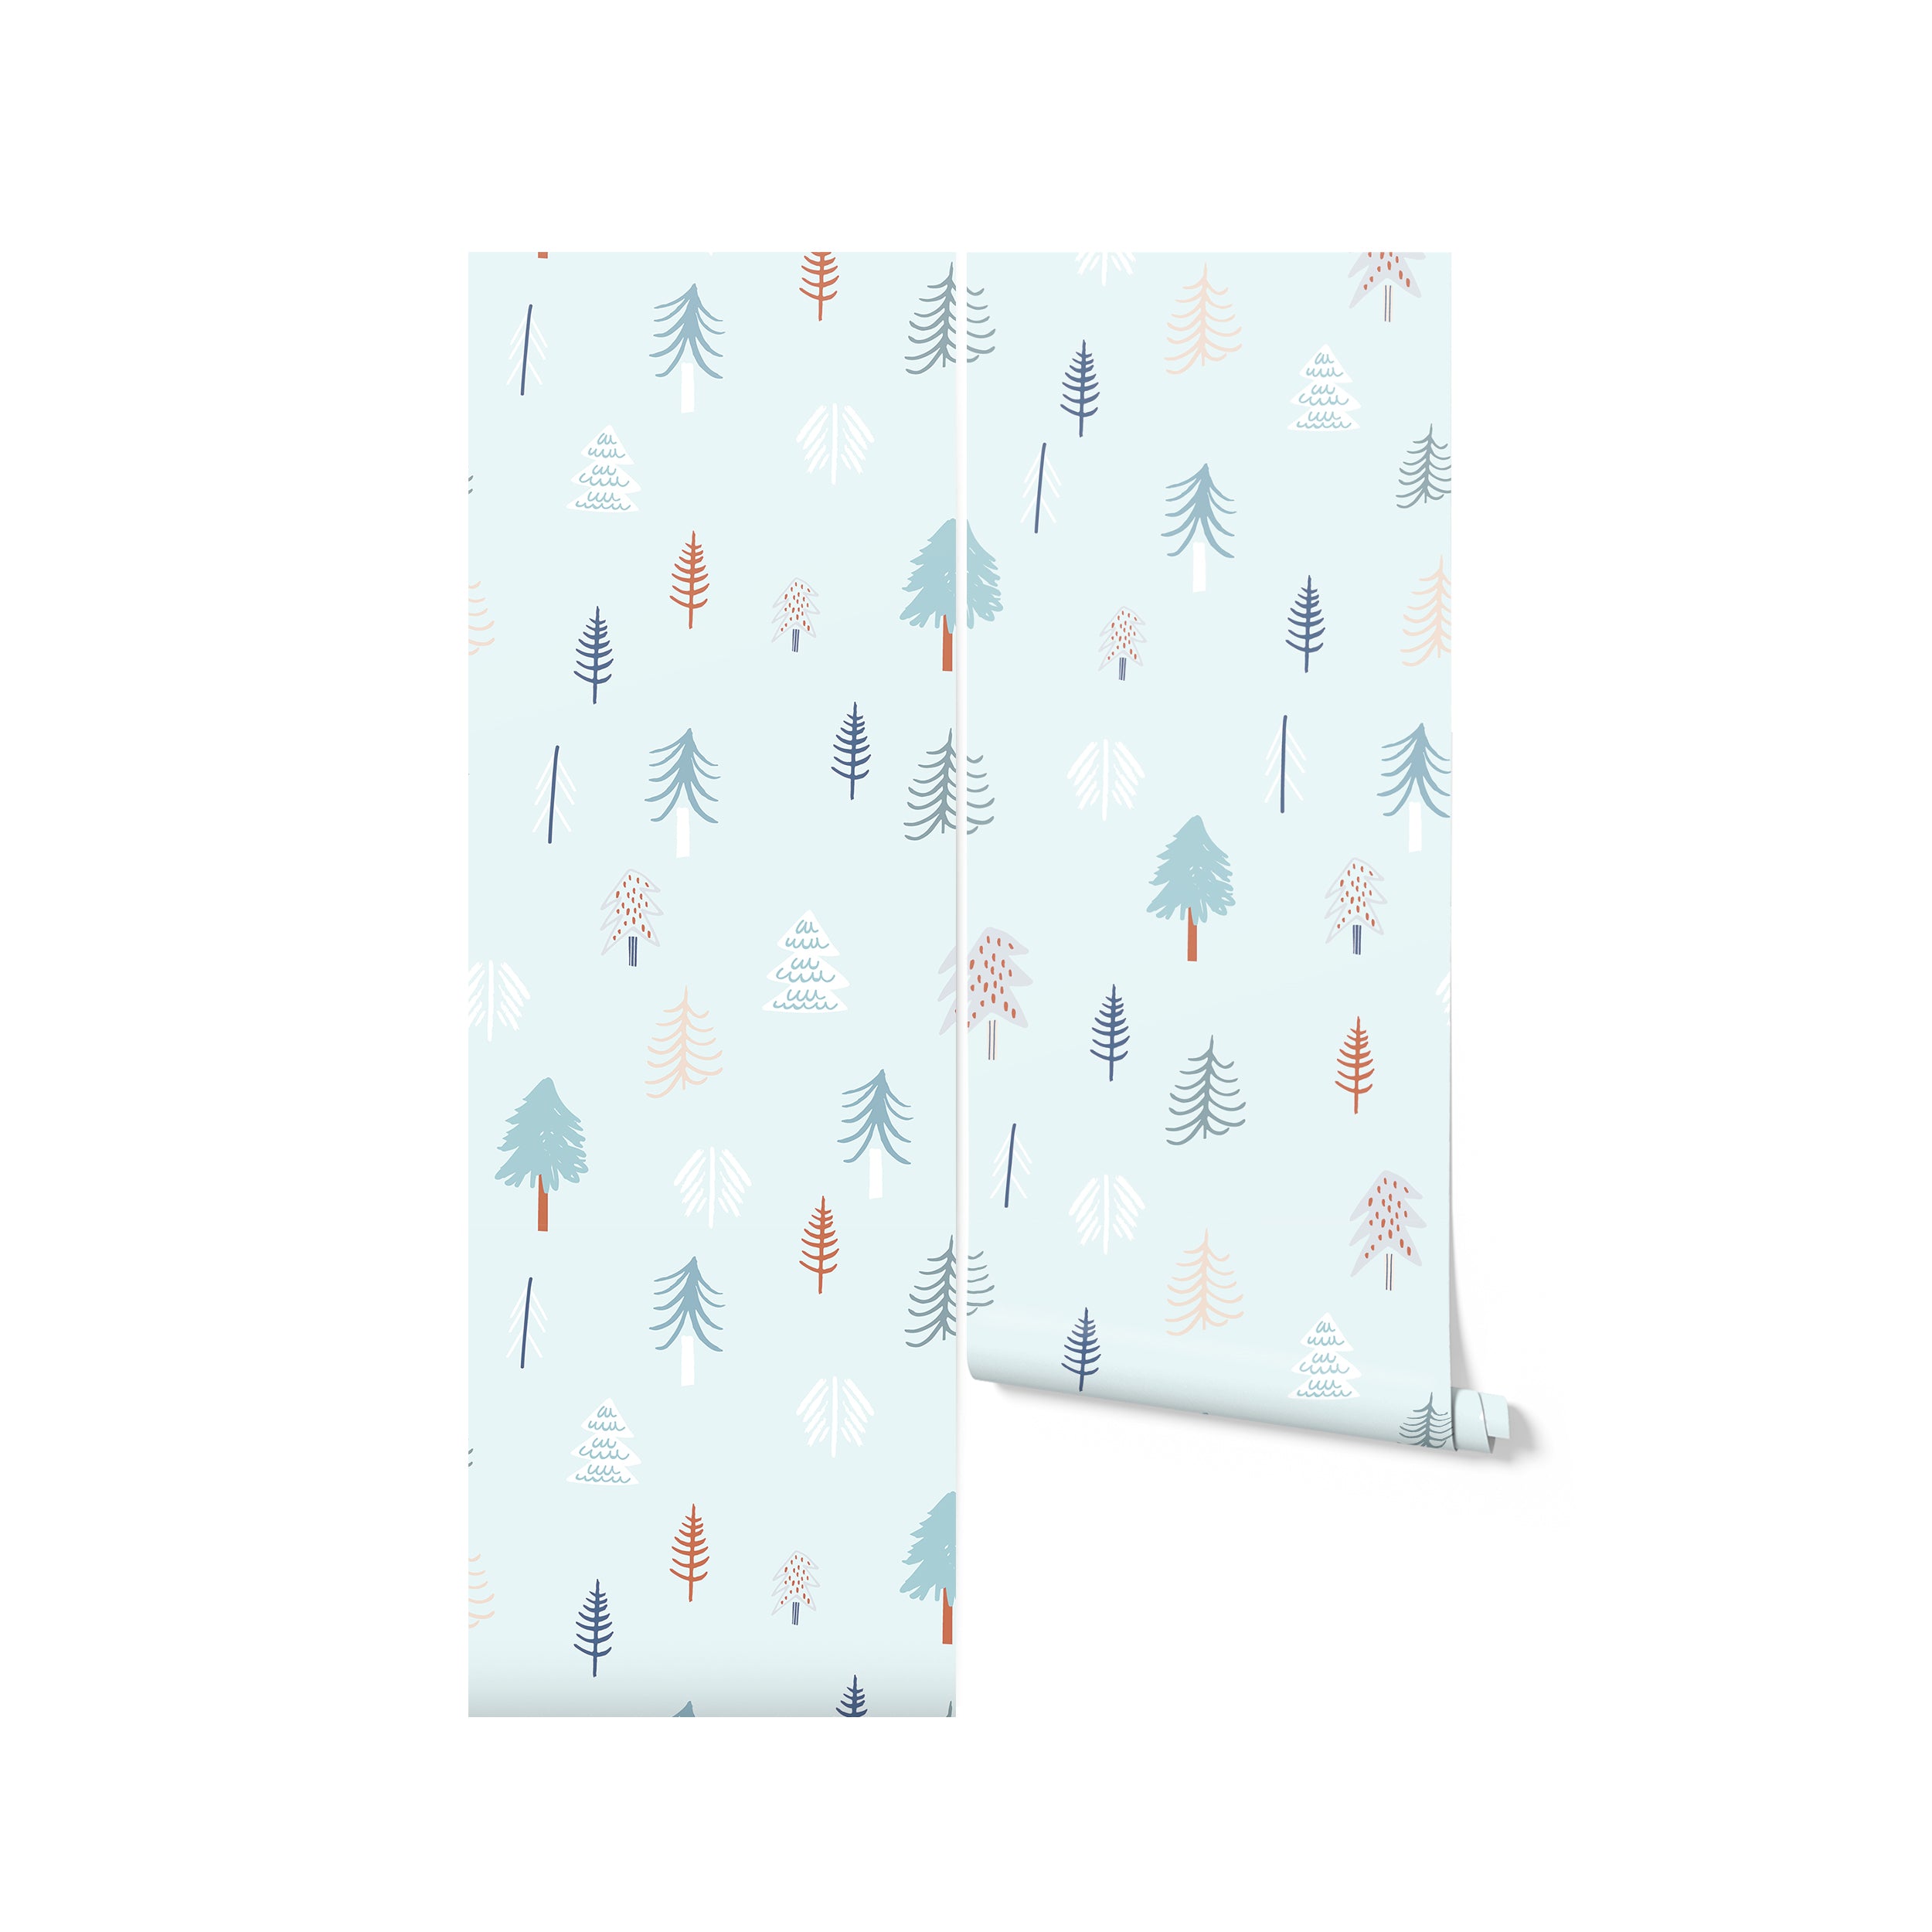 A roll of "Nordic Tree Wallpaper" showcasing a delightful pattern of stylized trees in soft colors like orange and blue, set against a light blue background. The whimsical tree designs vary in shape and size, perfect for adding a serene natural touch to any room.